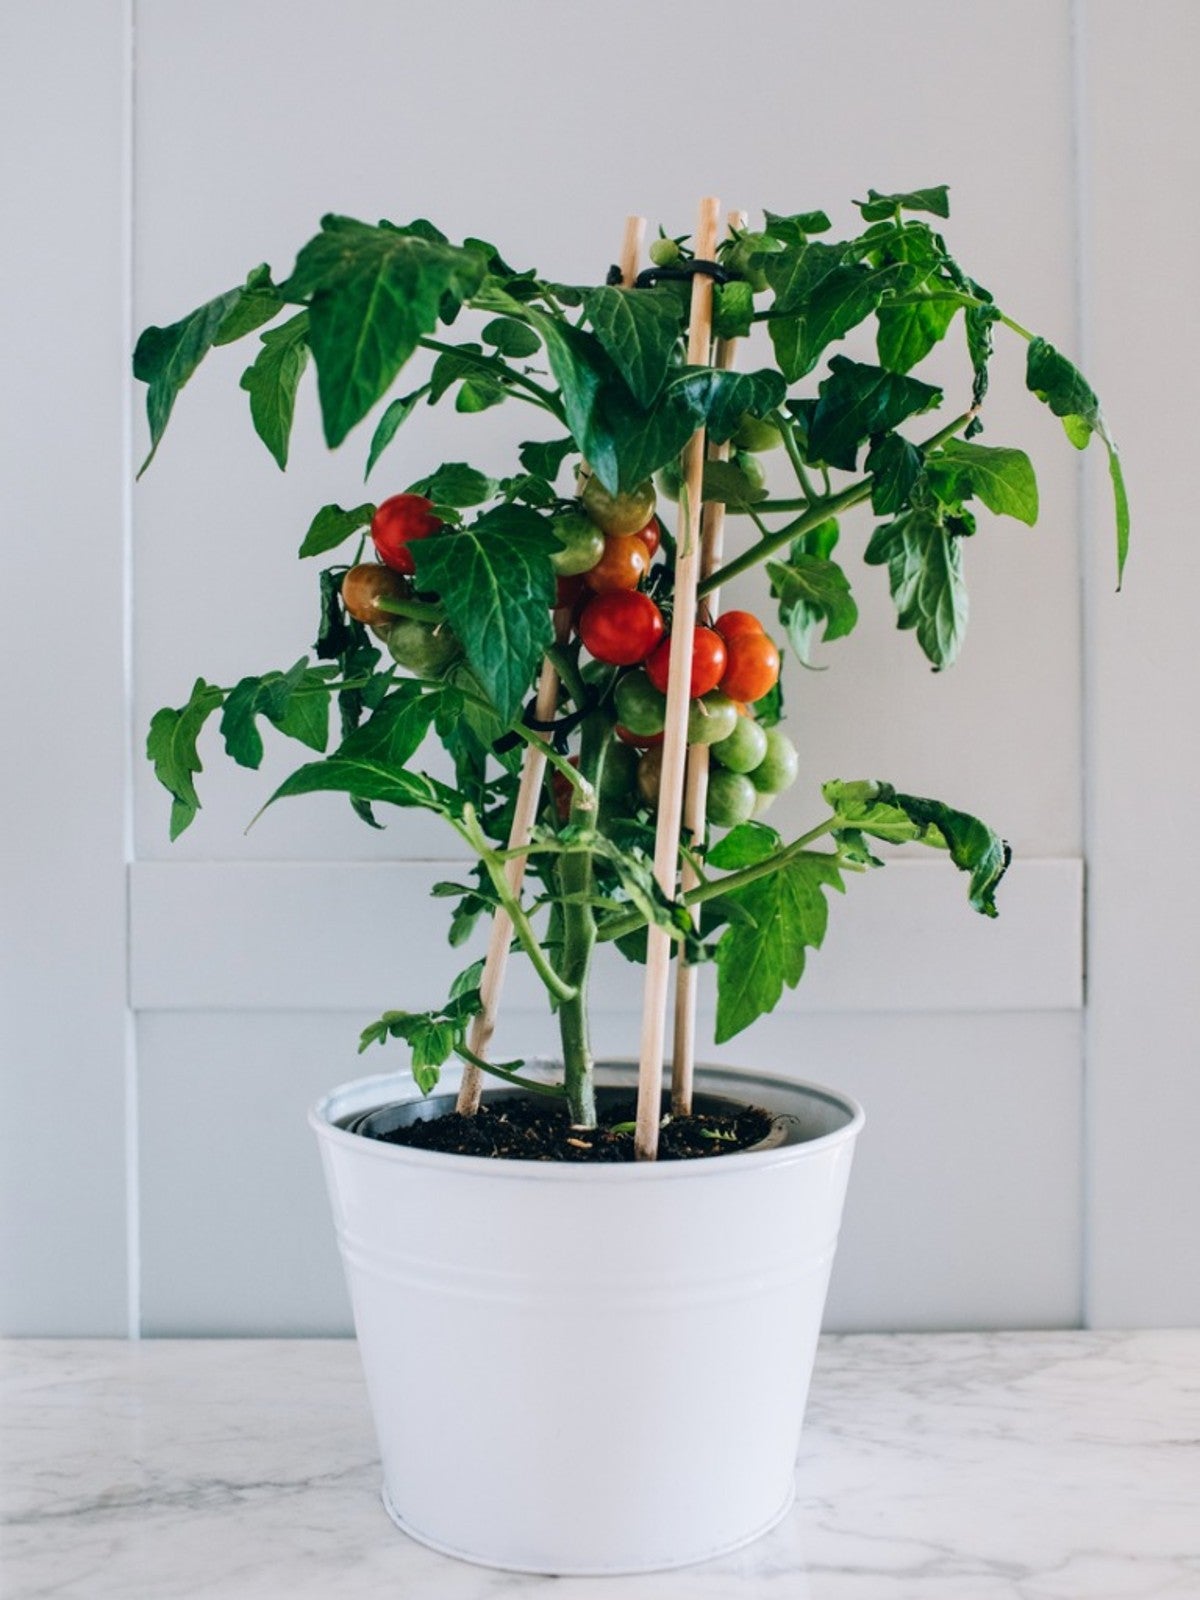 Container Tomatoes: Tips On Growing Tomatoes In Containers